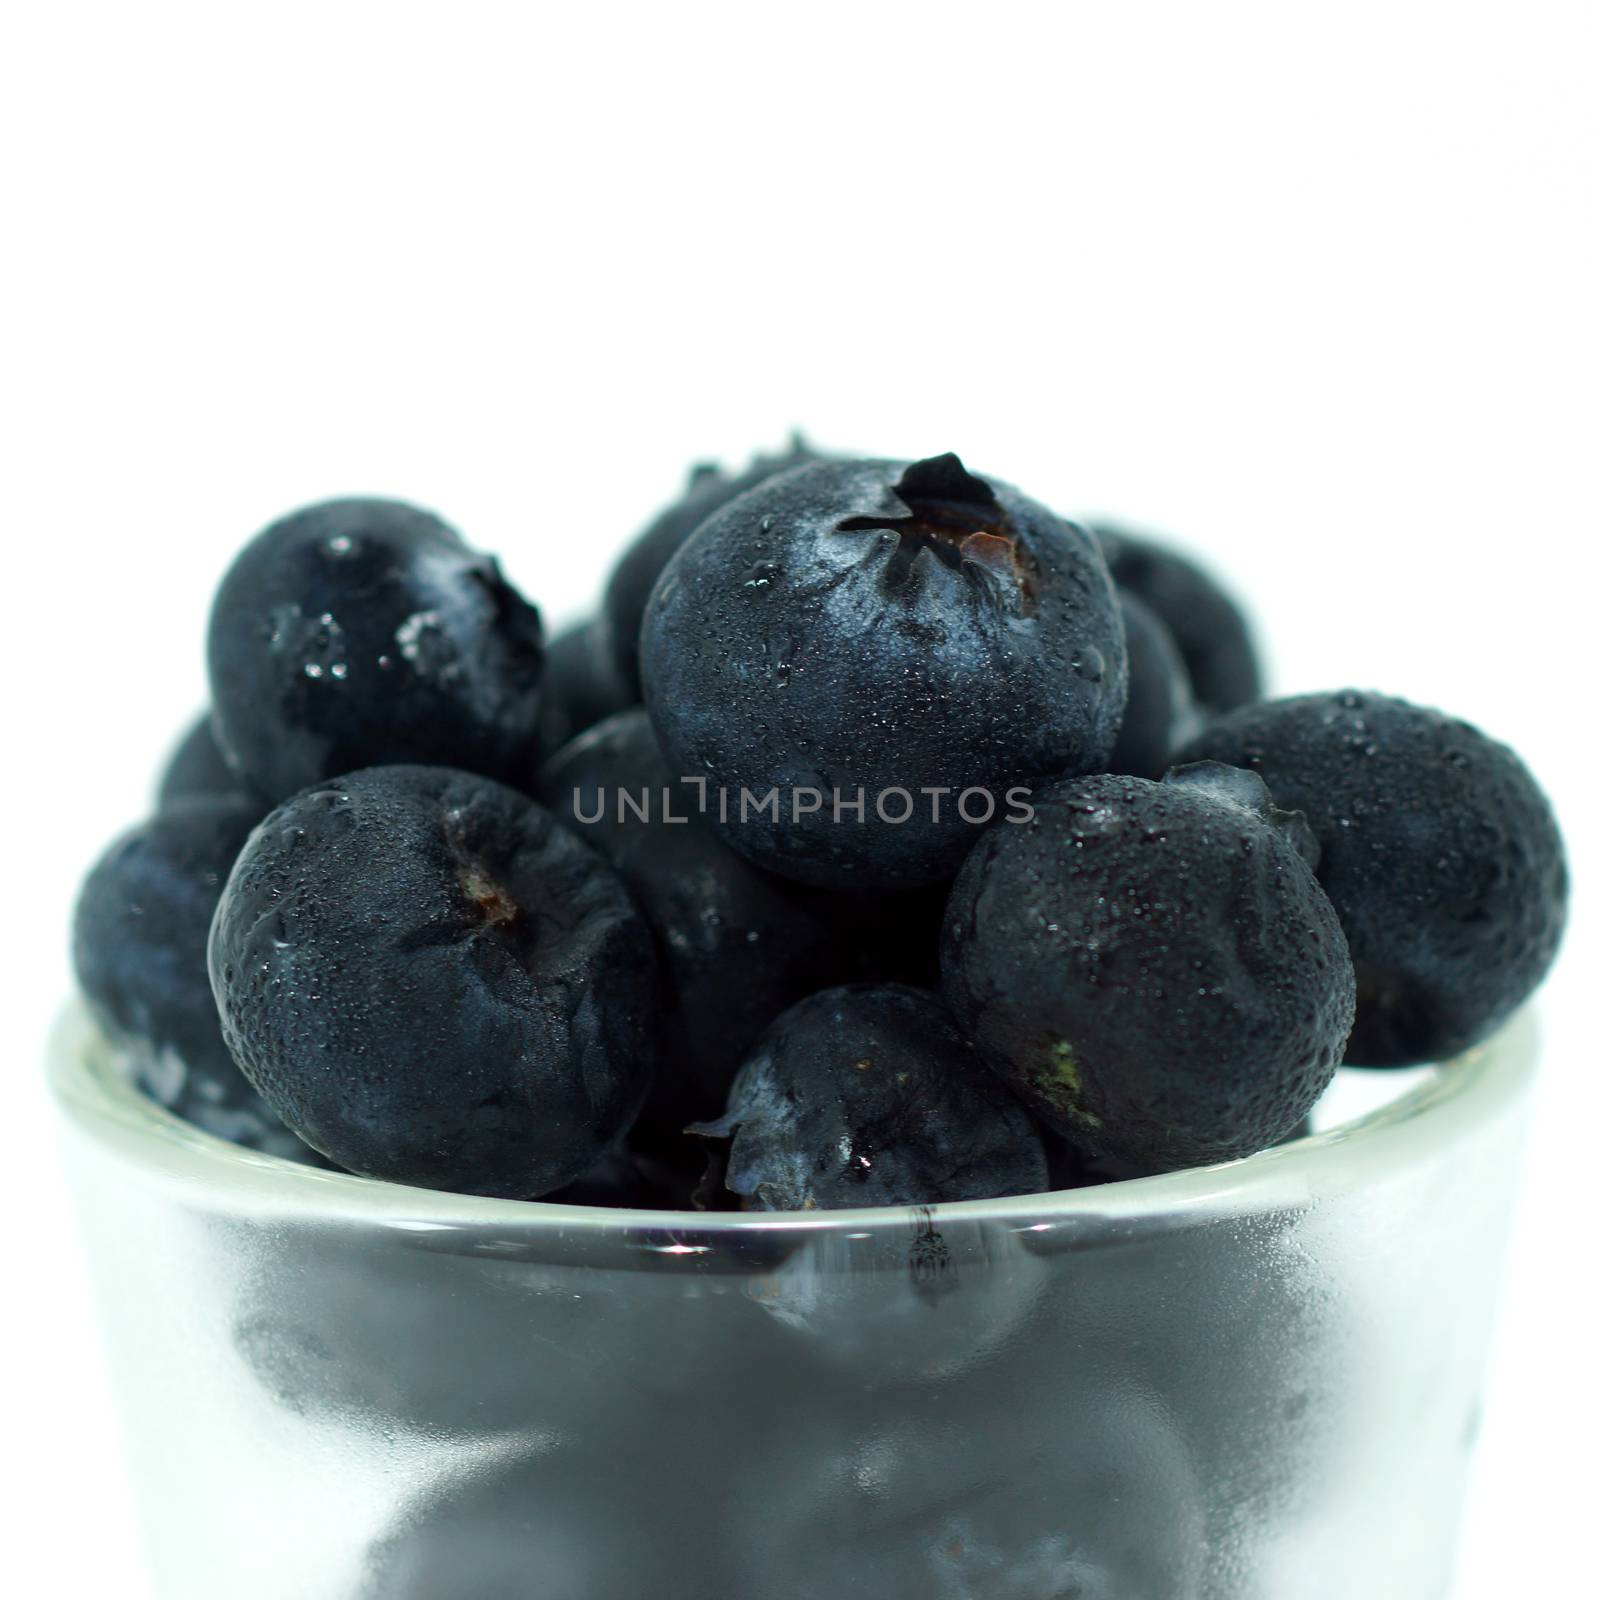 Blueberries with leaves on white background by Noppharat_th